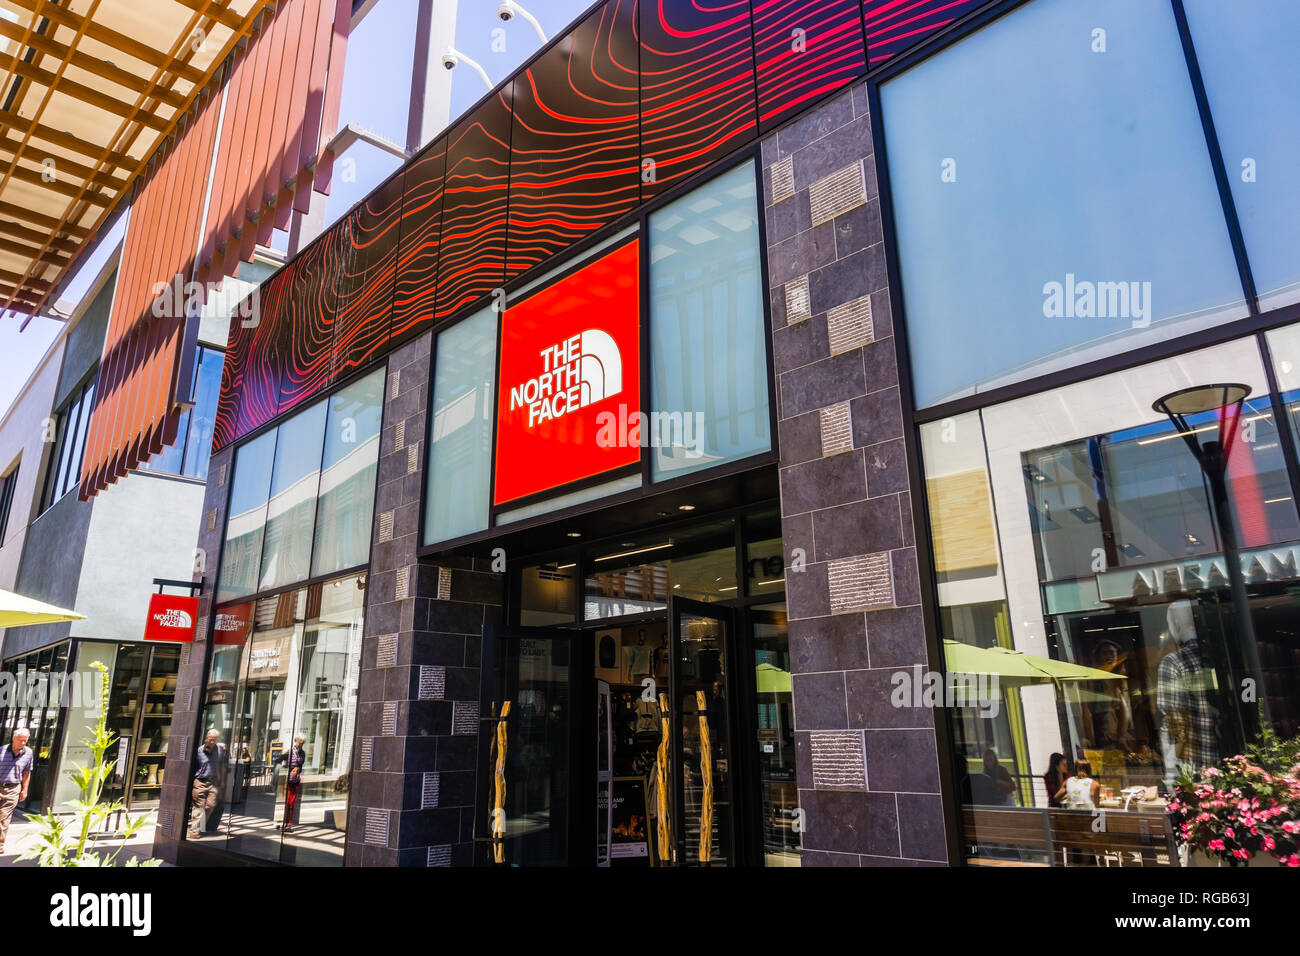 August 2, 2018 Palo Alto / CA / USA - The North Face store located in the upscale open air Stanford Shopping Mall, Silicon Valley, California Stock Photo